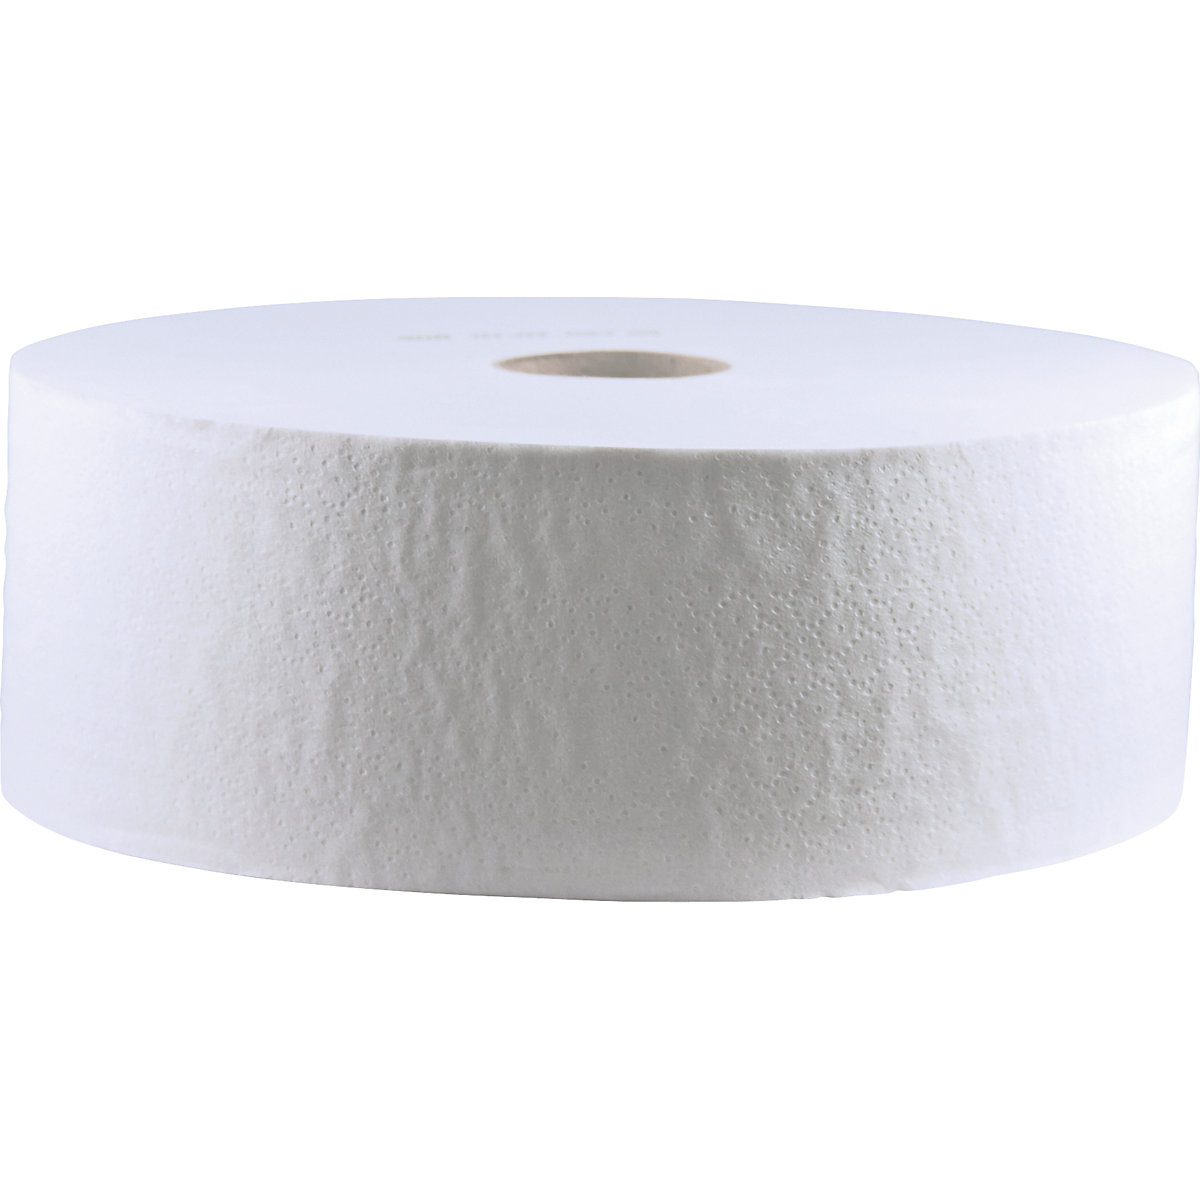 Large rolls of toilet tissue – CWS